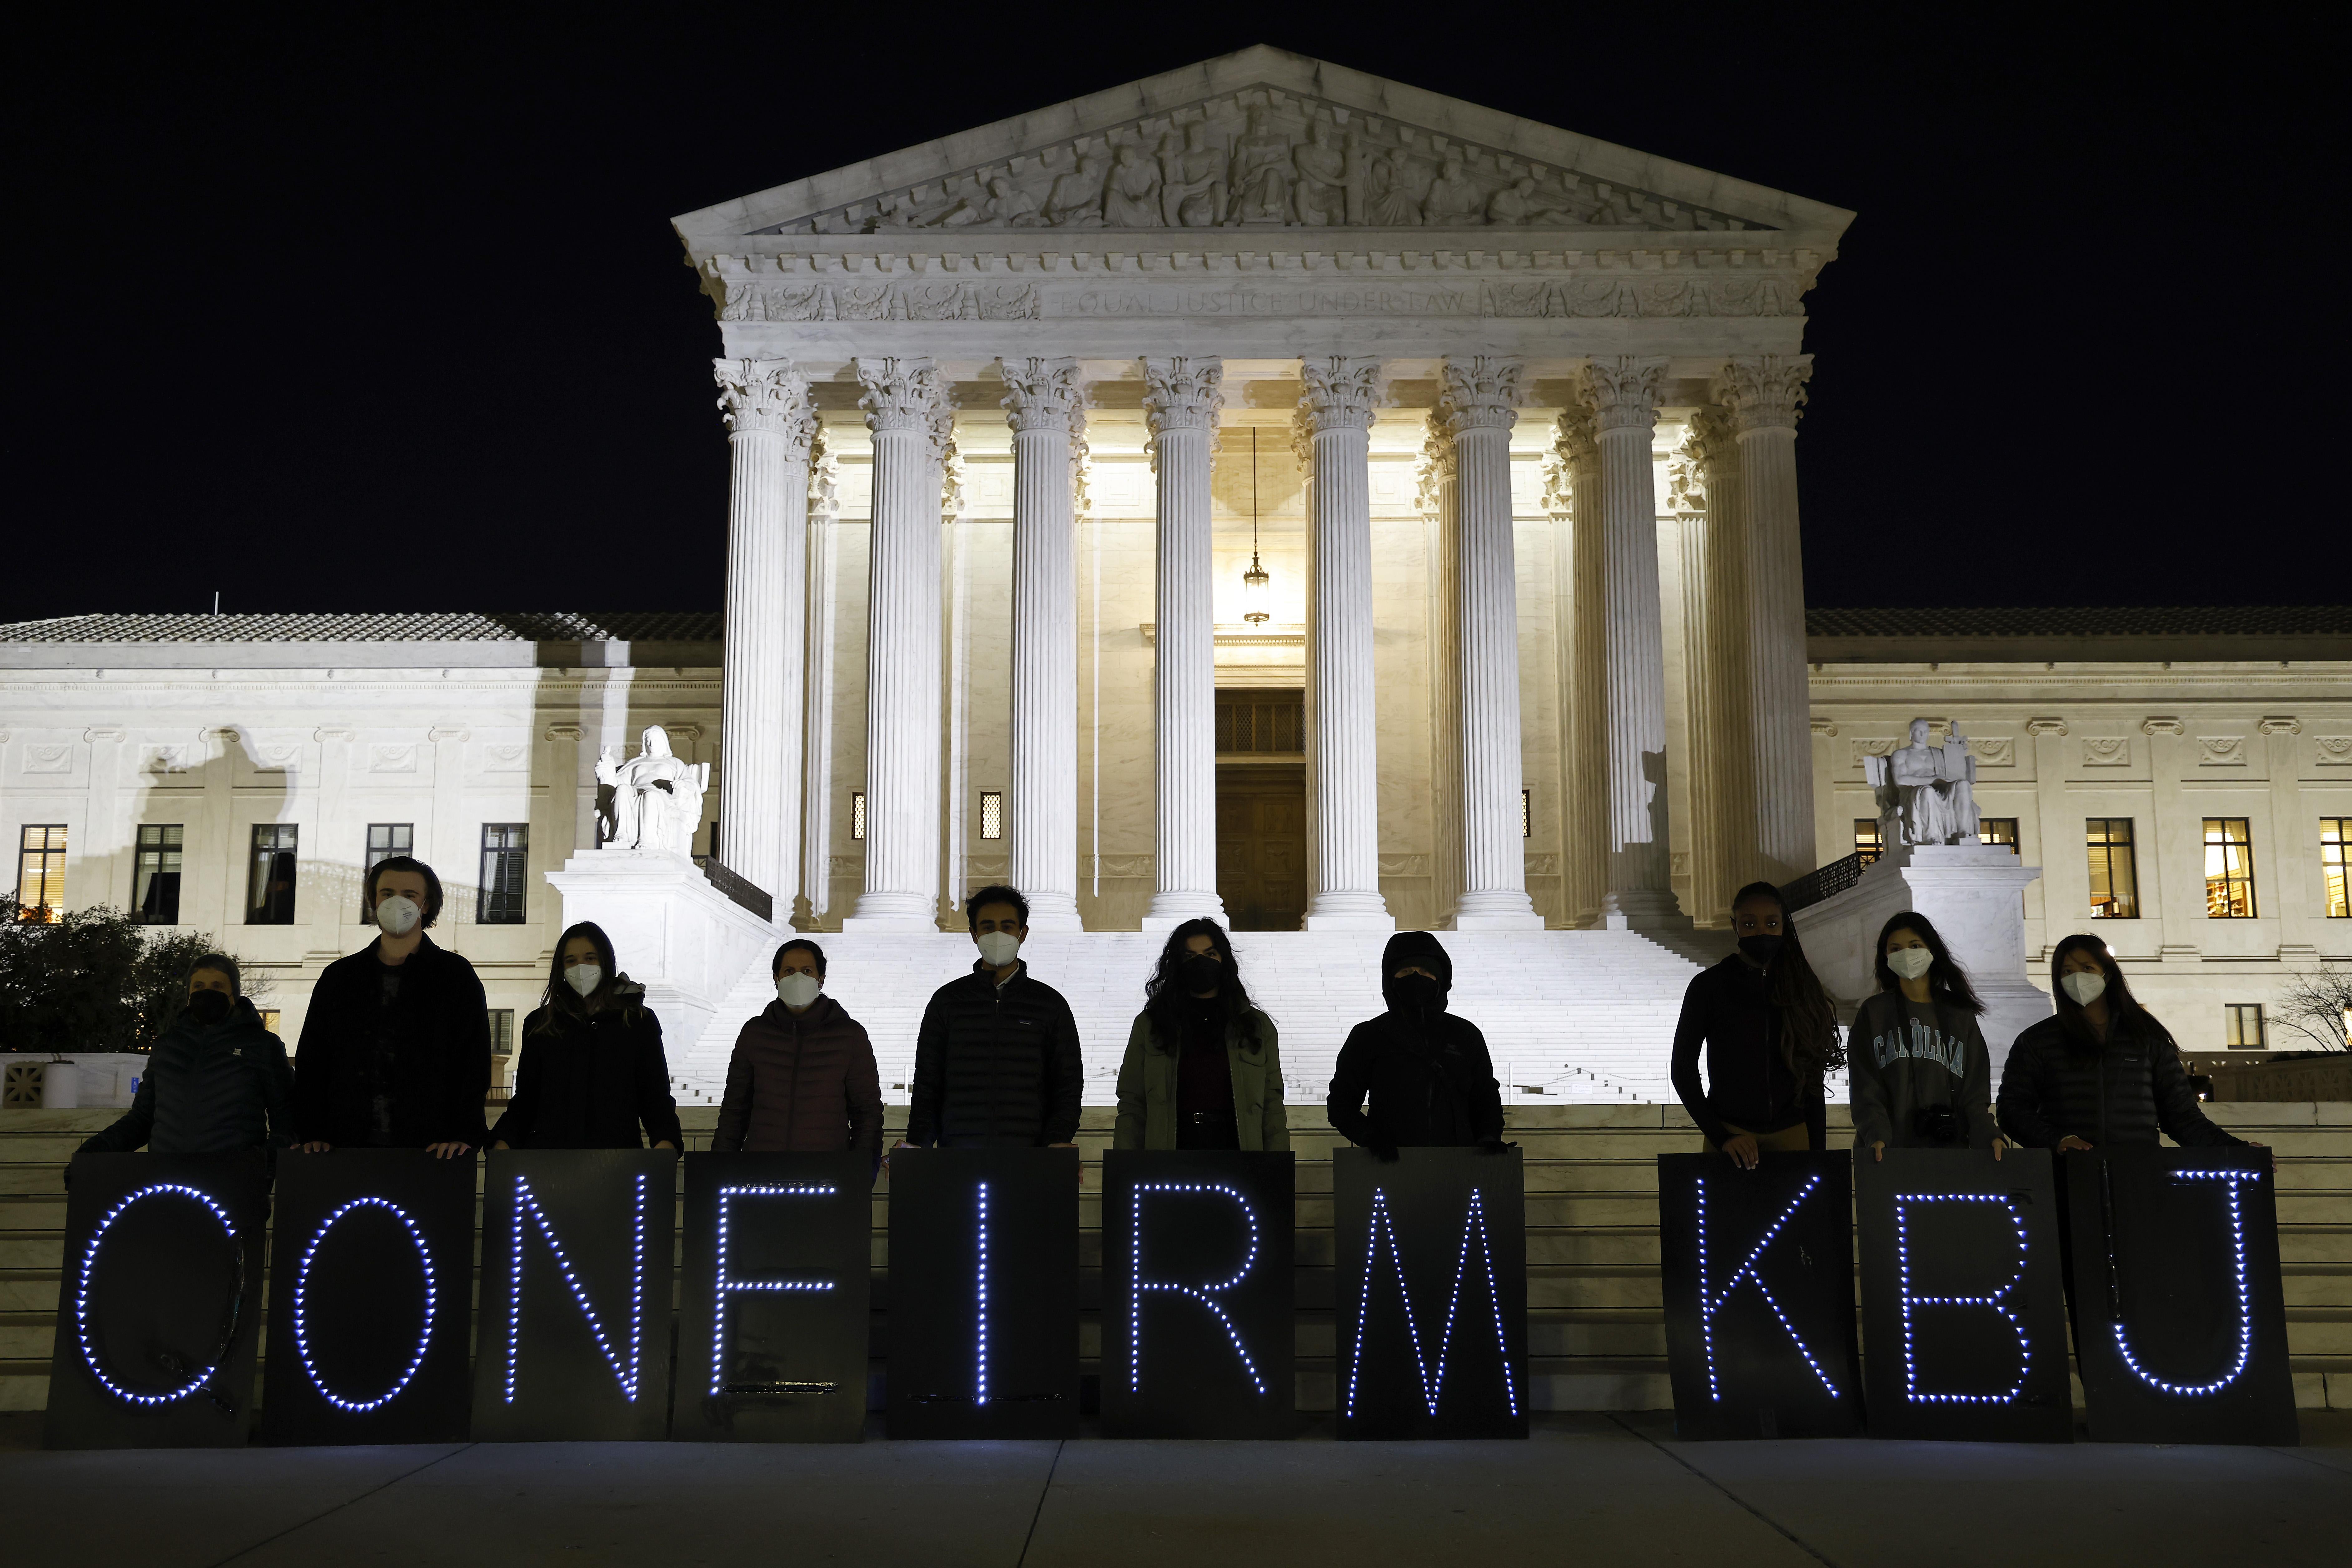 People stand in front of the Supreme Court at night holding up signs with letters spelling out "CONFIRM KBJ"